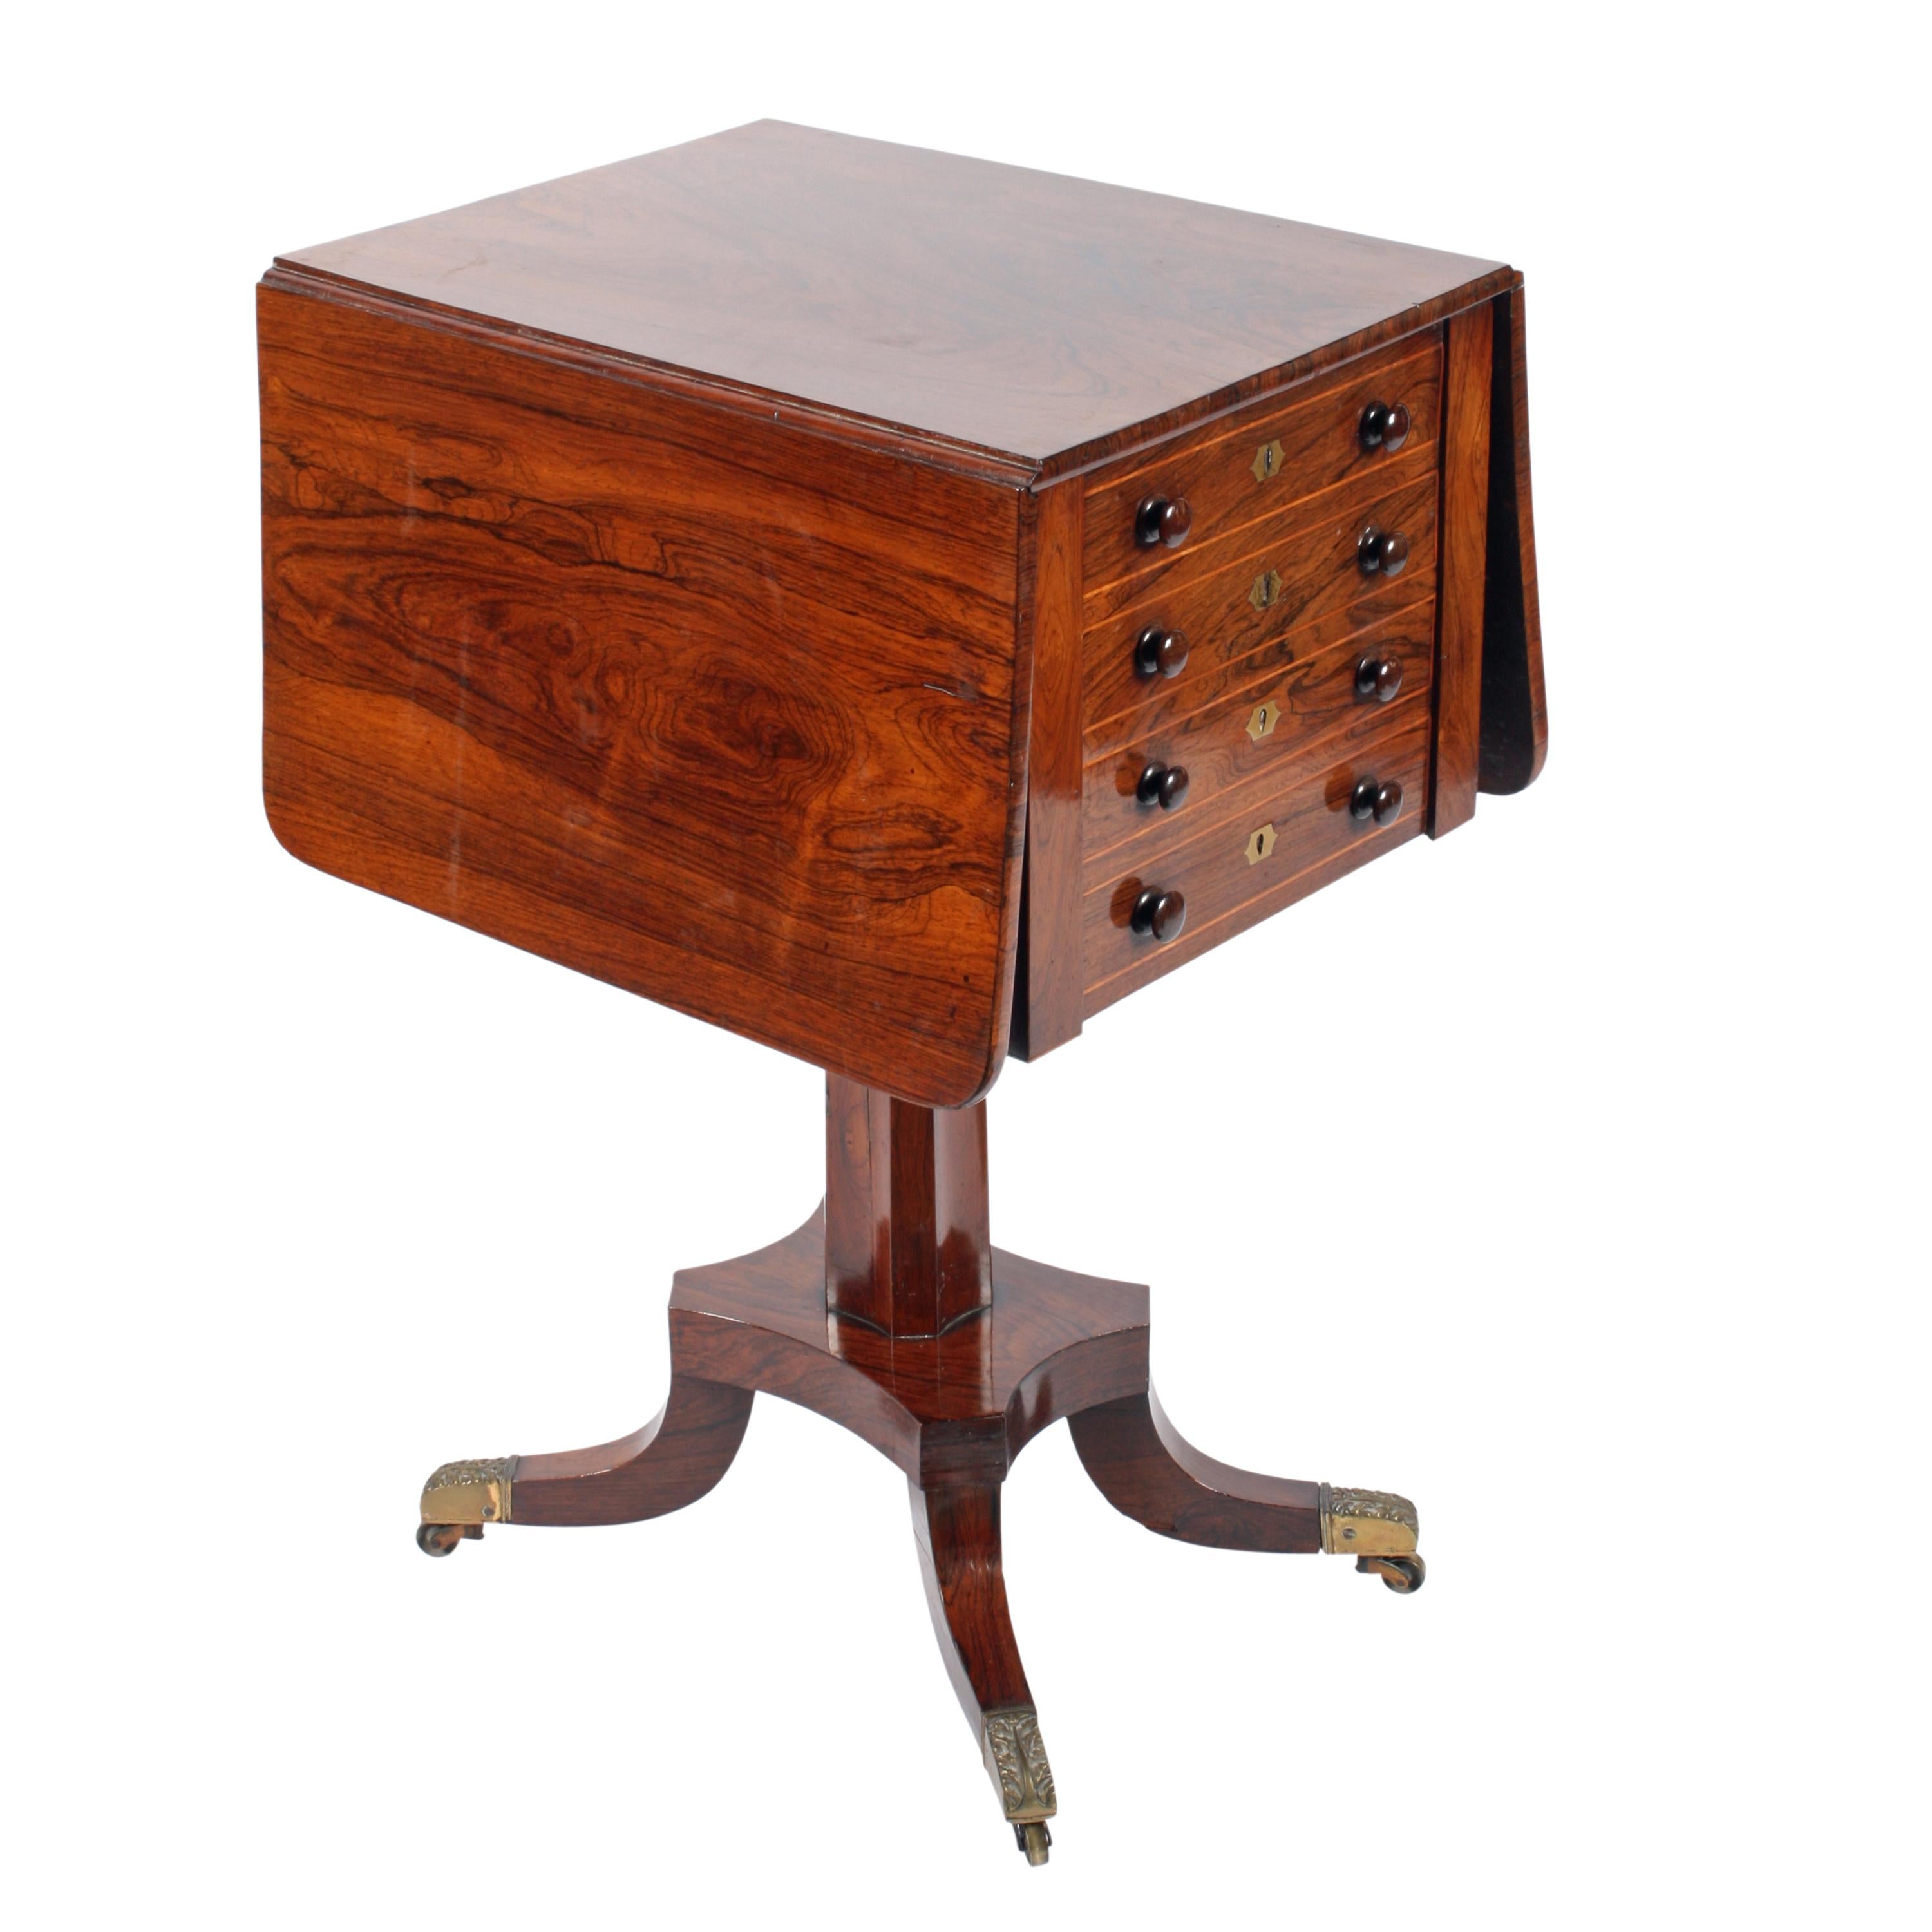 A Regency rosewood drop leaf work table.

The table stands on a platform base with four short sabre legs that have decorative brass toes and casters.

The tabletop has a triple drawer faced deep drawer with a fitted slim drawer above, all